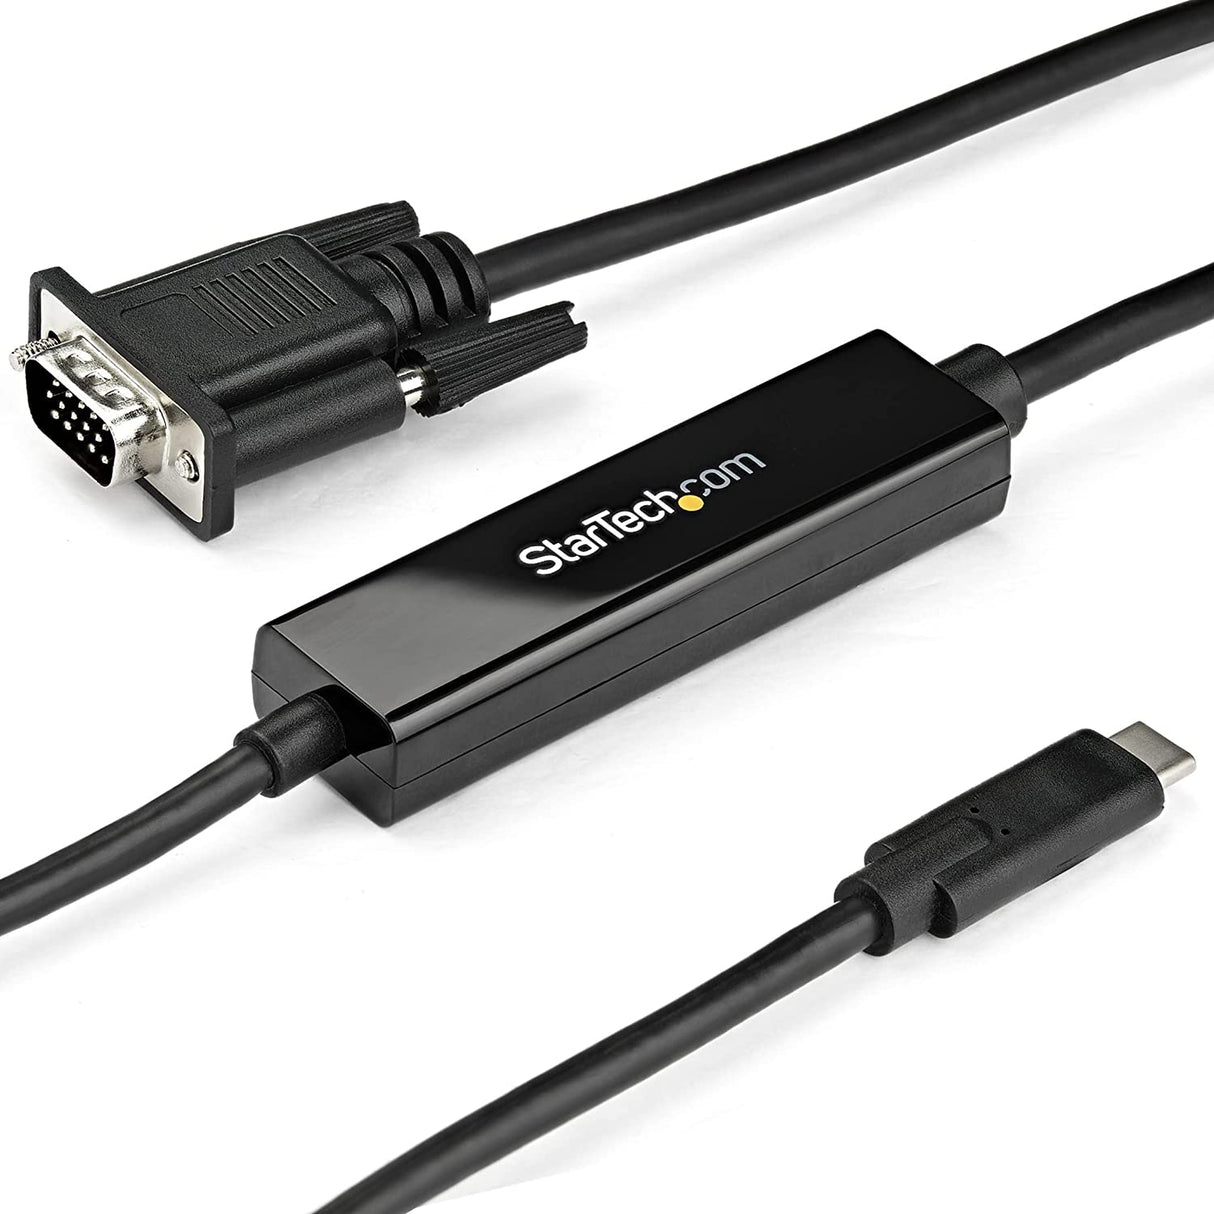 StarTech.com 3ft/1m USB C to VGA Cable - 1920x1200/1080p USB Type C to VGA Video Active Adapter Cable - Thunderbolt 3 Compatible - Laptop to VGA Monitor/Projector - DP Alt Mode HBR2 (CDP2VGAMM1MB) 3.3 feet